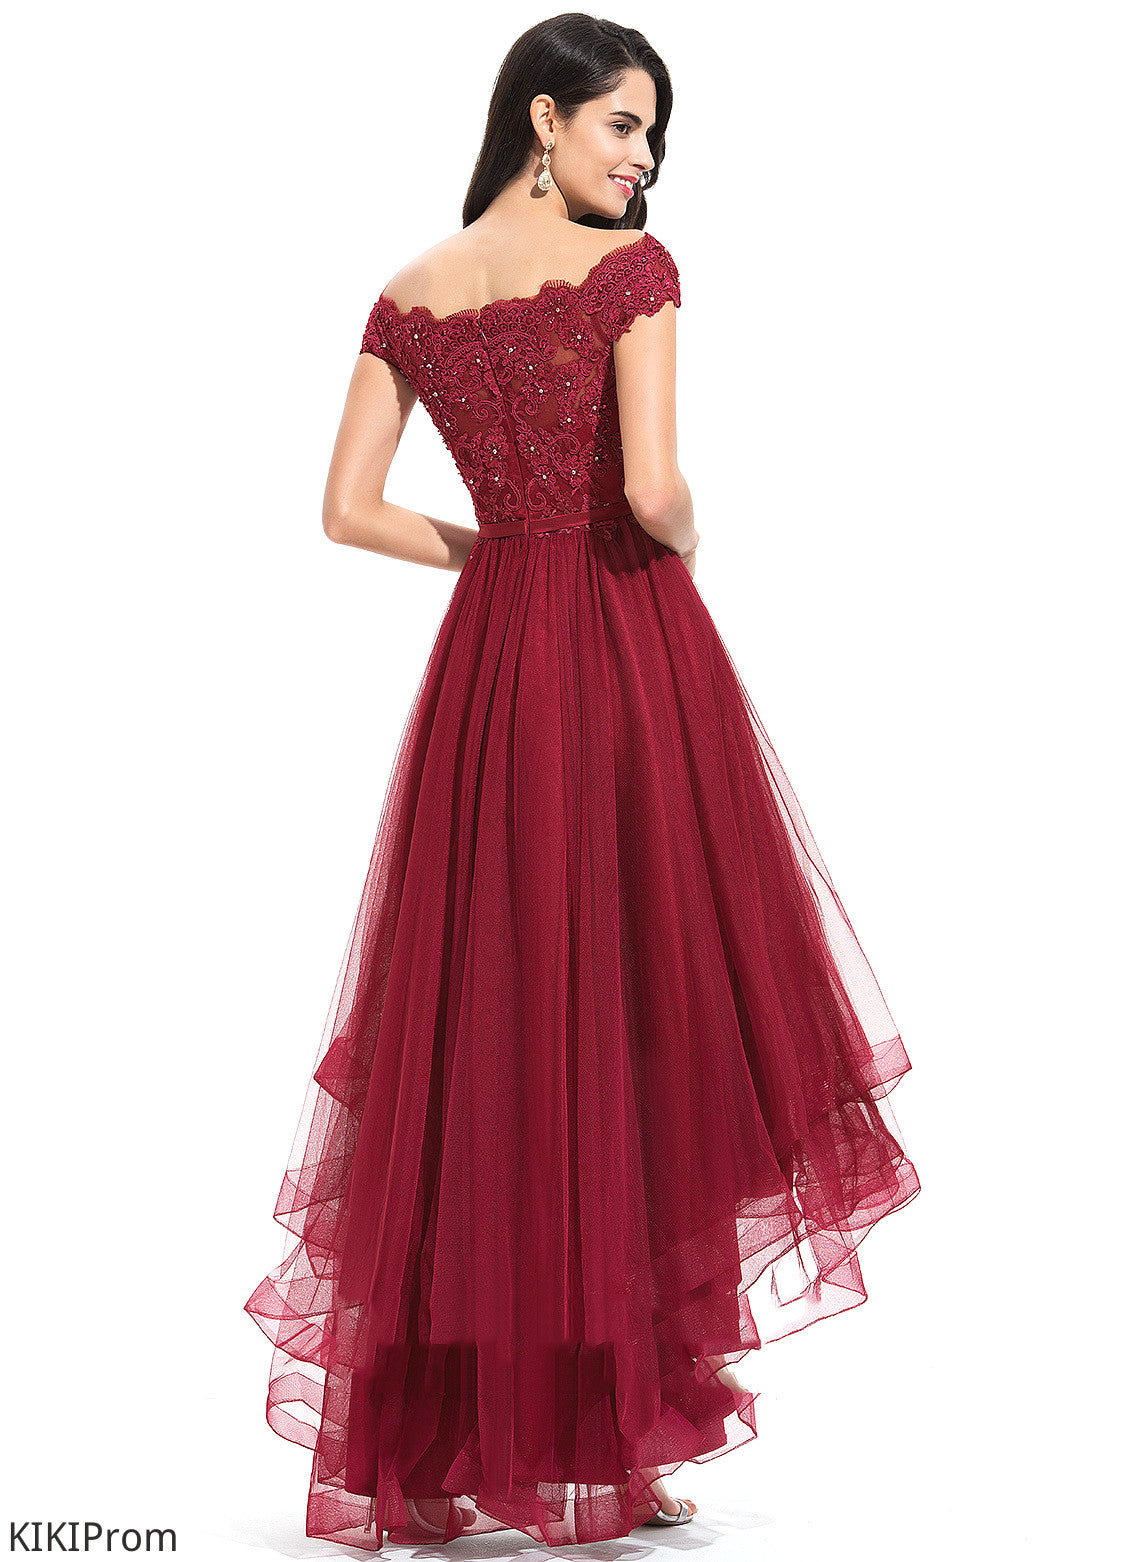 Dress Tulle Bow(s) Homecoming Dresses Homecoming A-Line Neveah Asymmetrical Off-the-Shoulder Beading With Lace